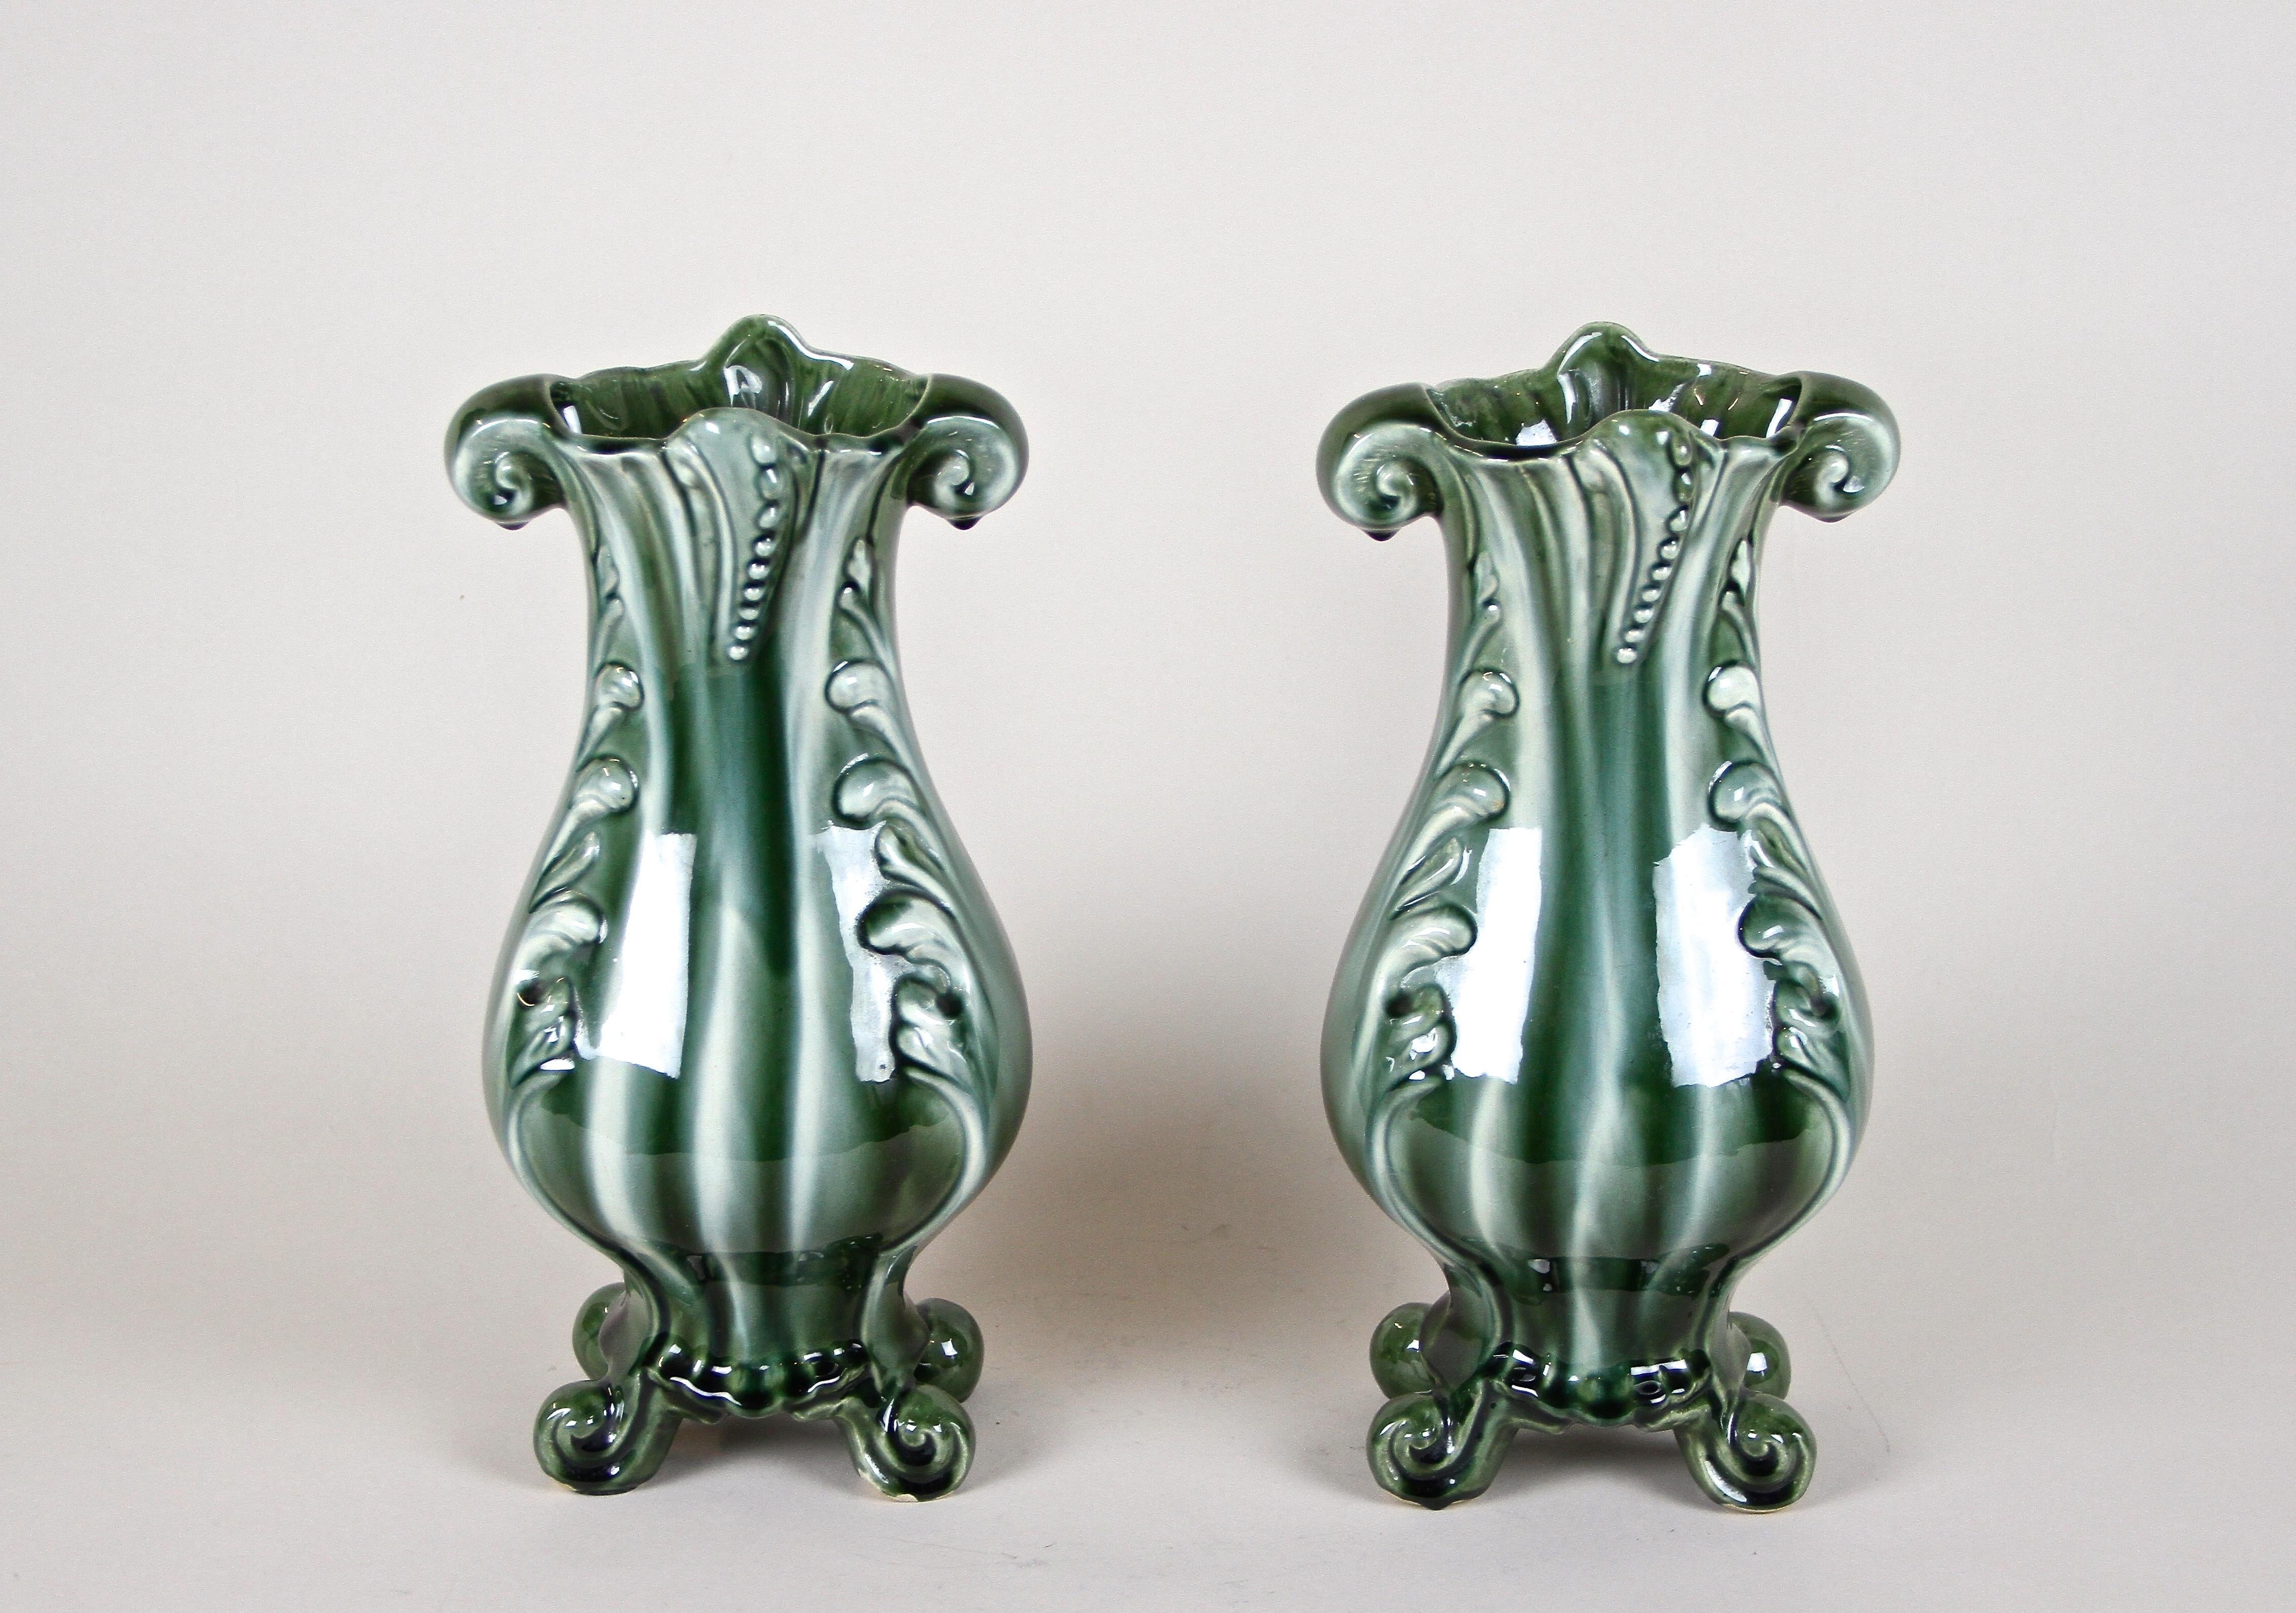 Lovely pair of Art Nouveau Ceramic Vases from the period in France around 1900. The unusual shaped vases show a beautiful glazed surface in very special green and white tones. A real nice pair of french ceramic vases from the early 20th century.